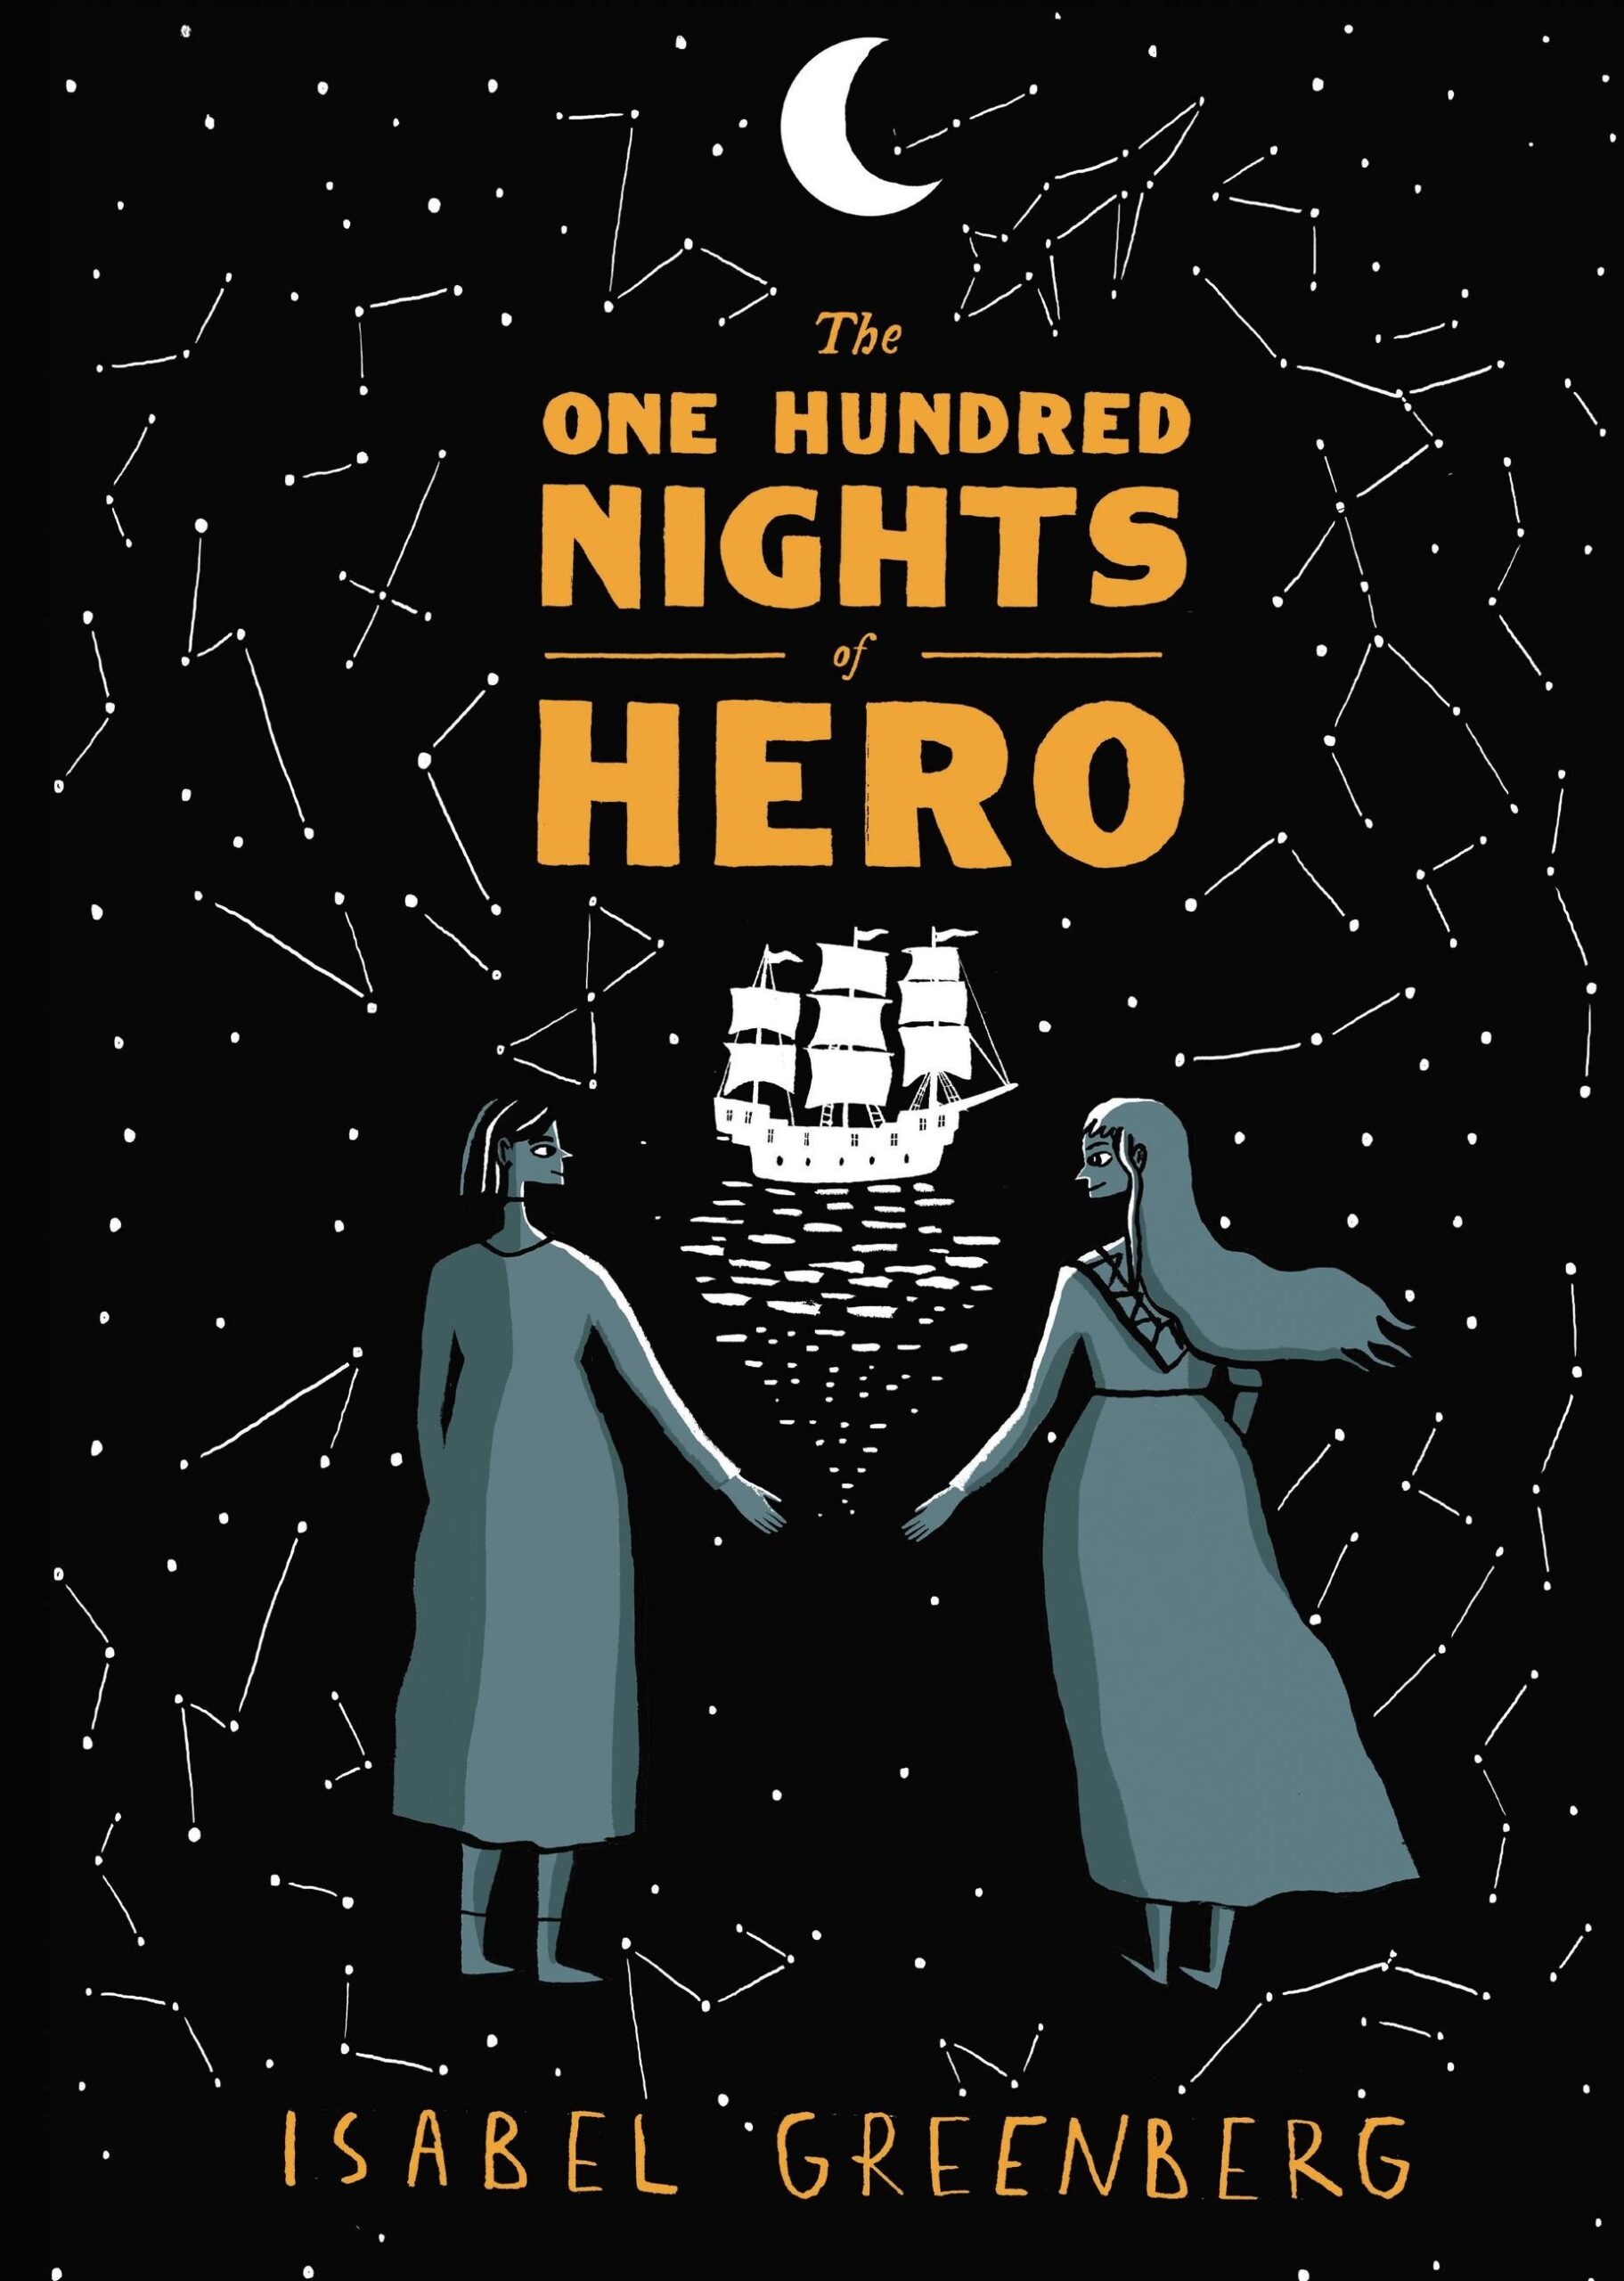 Early Earth: The One Hundred Nights of Hero by Isabel Greenberg